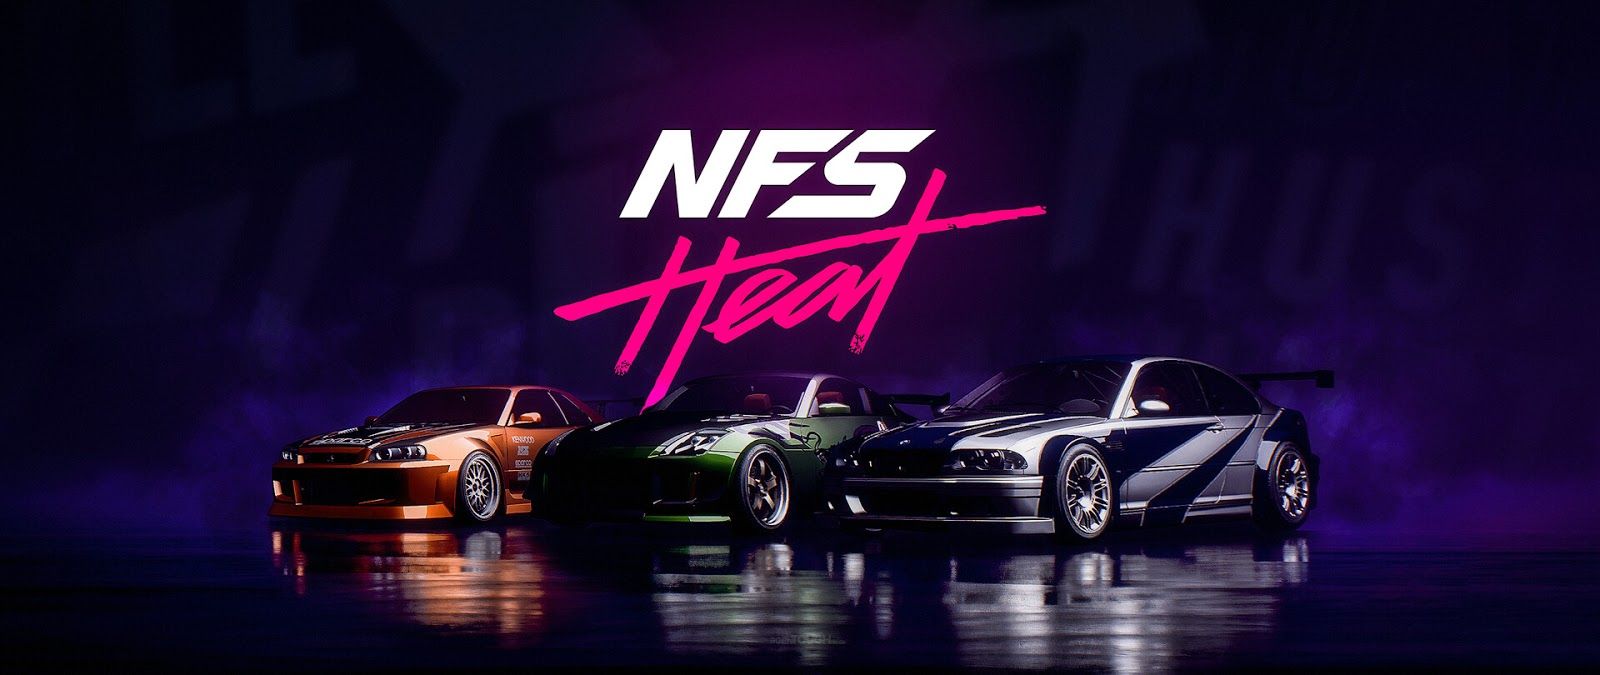 NEED FOR SPEED HEAT INFORMATION